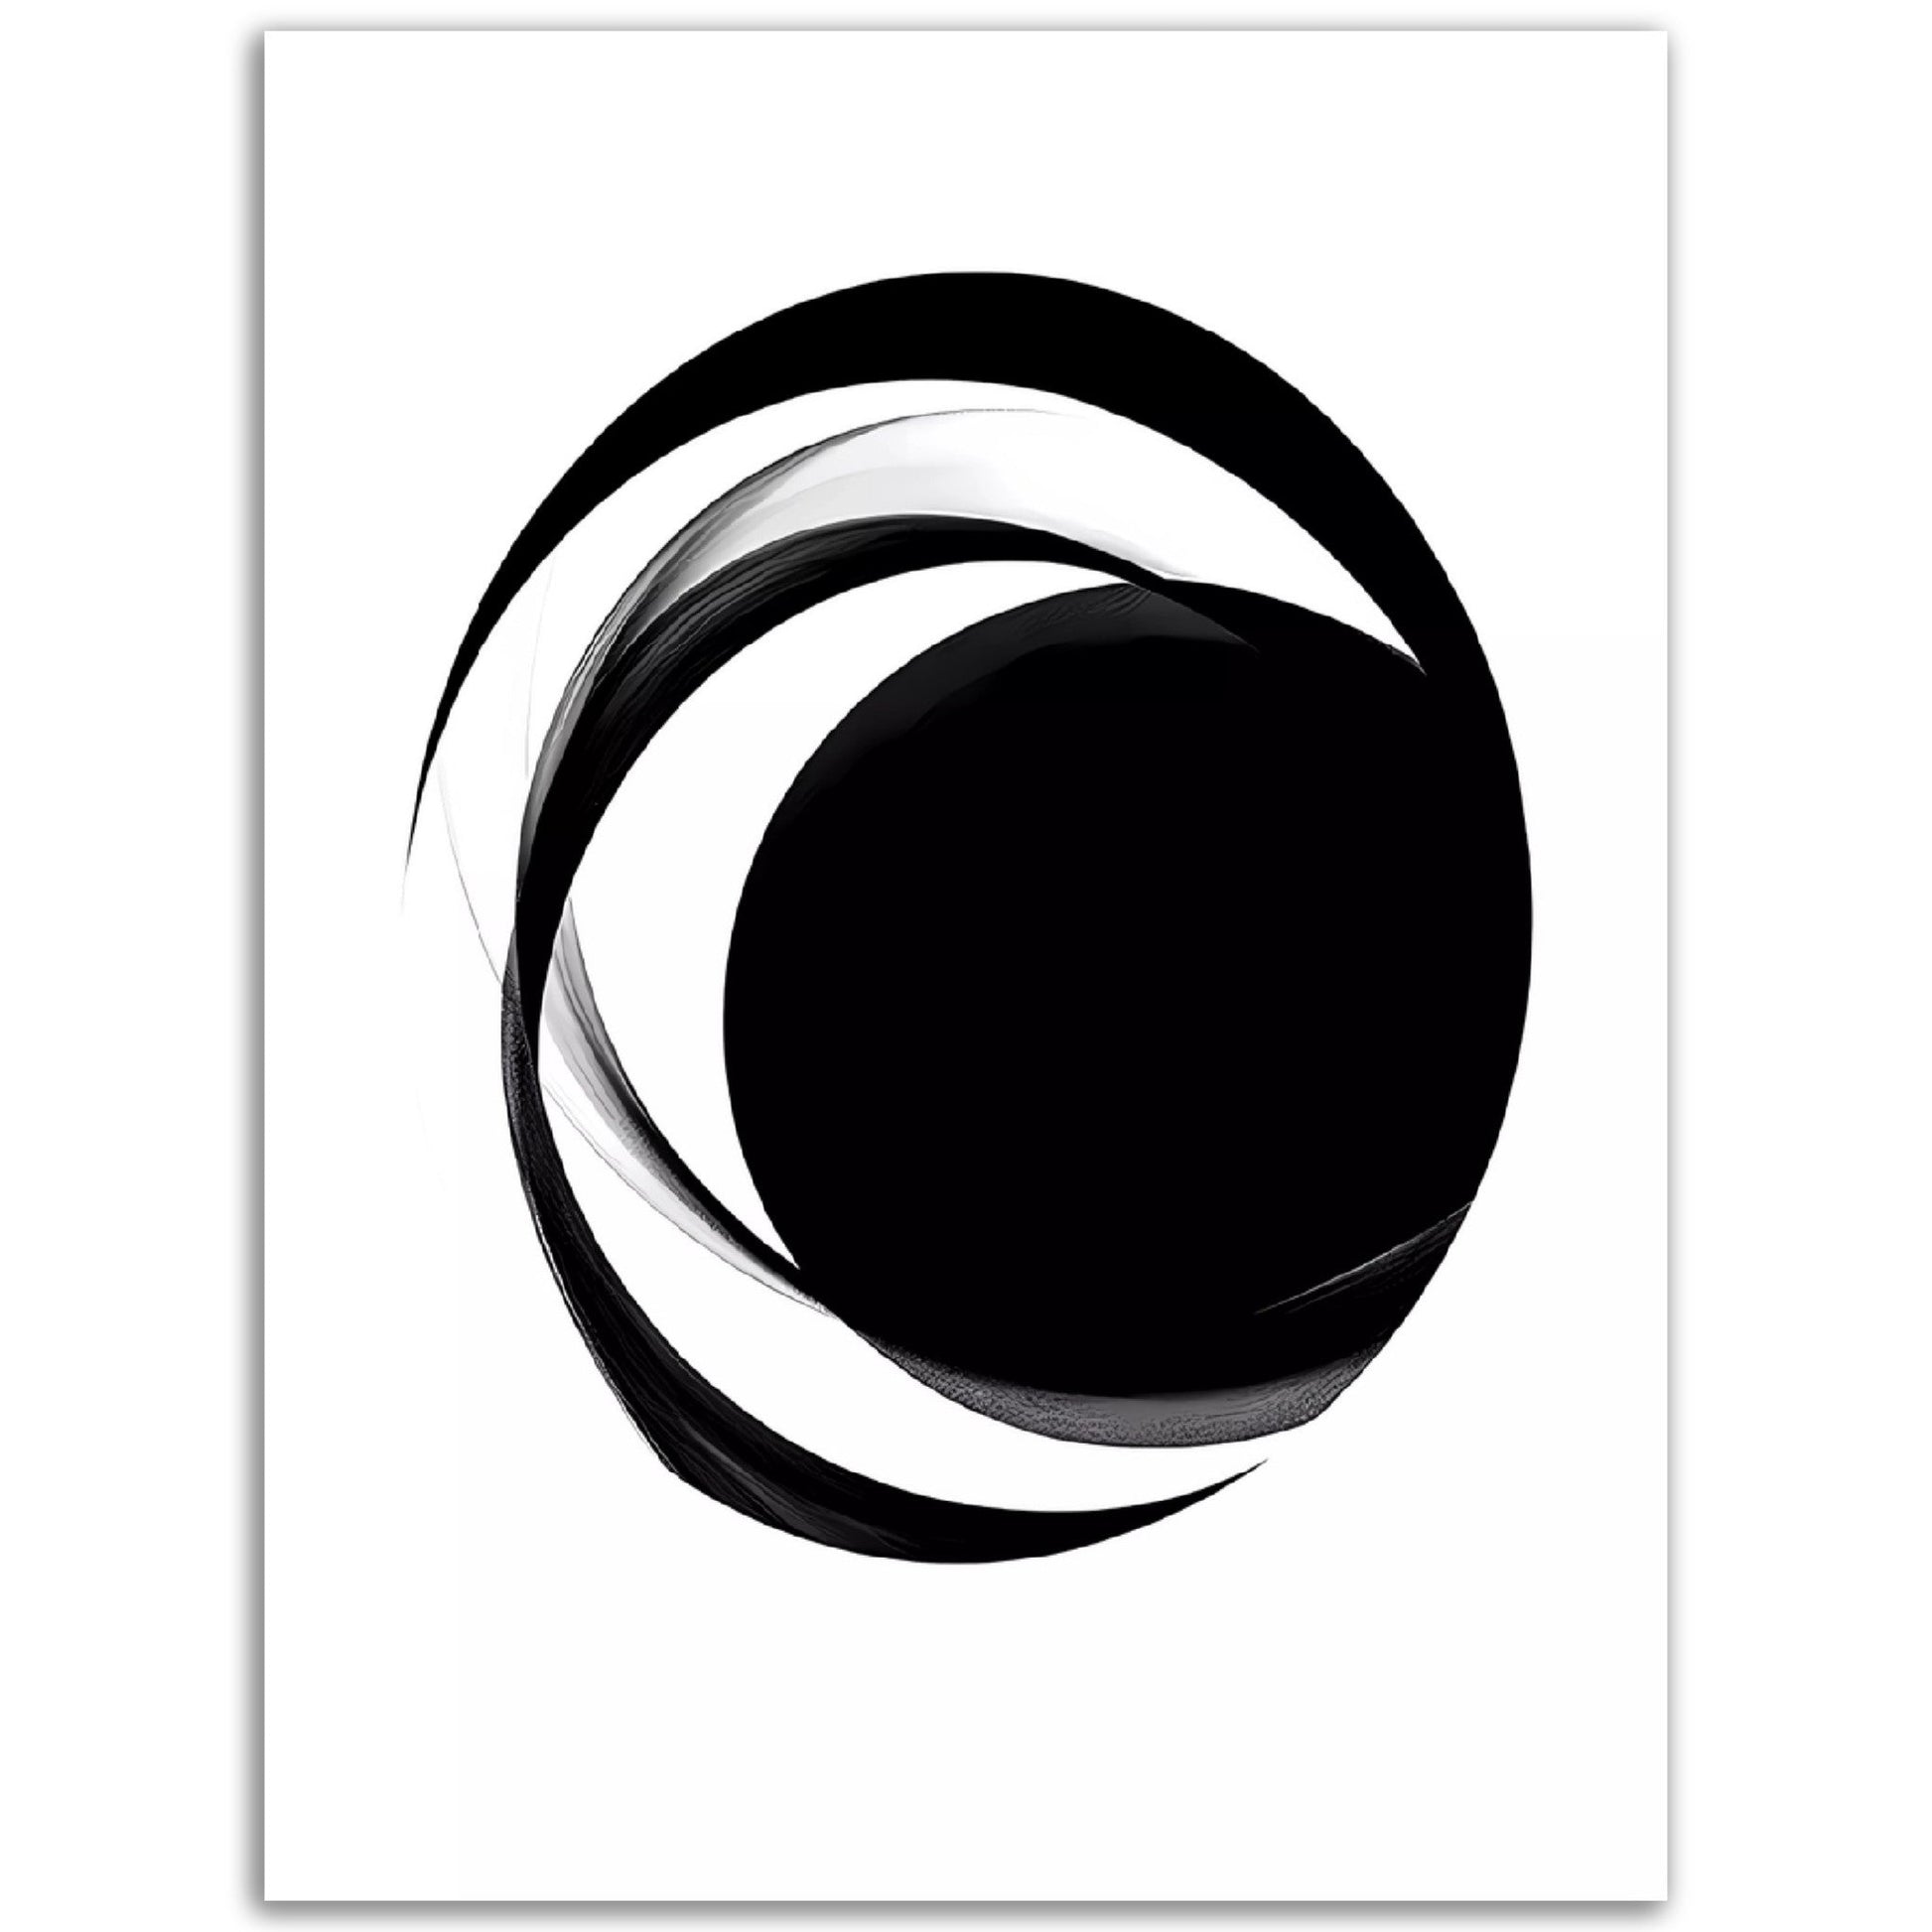 A black and white Abstract Art design, perfect for Circular Disintegration art or a poster.